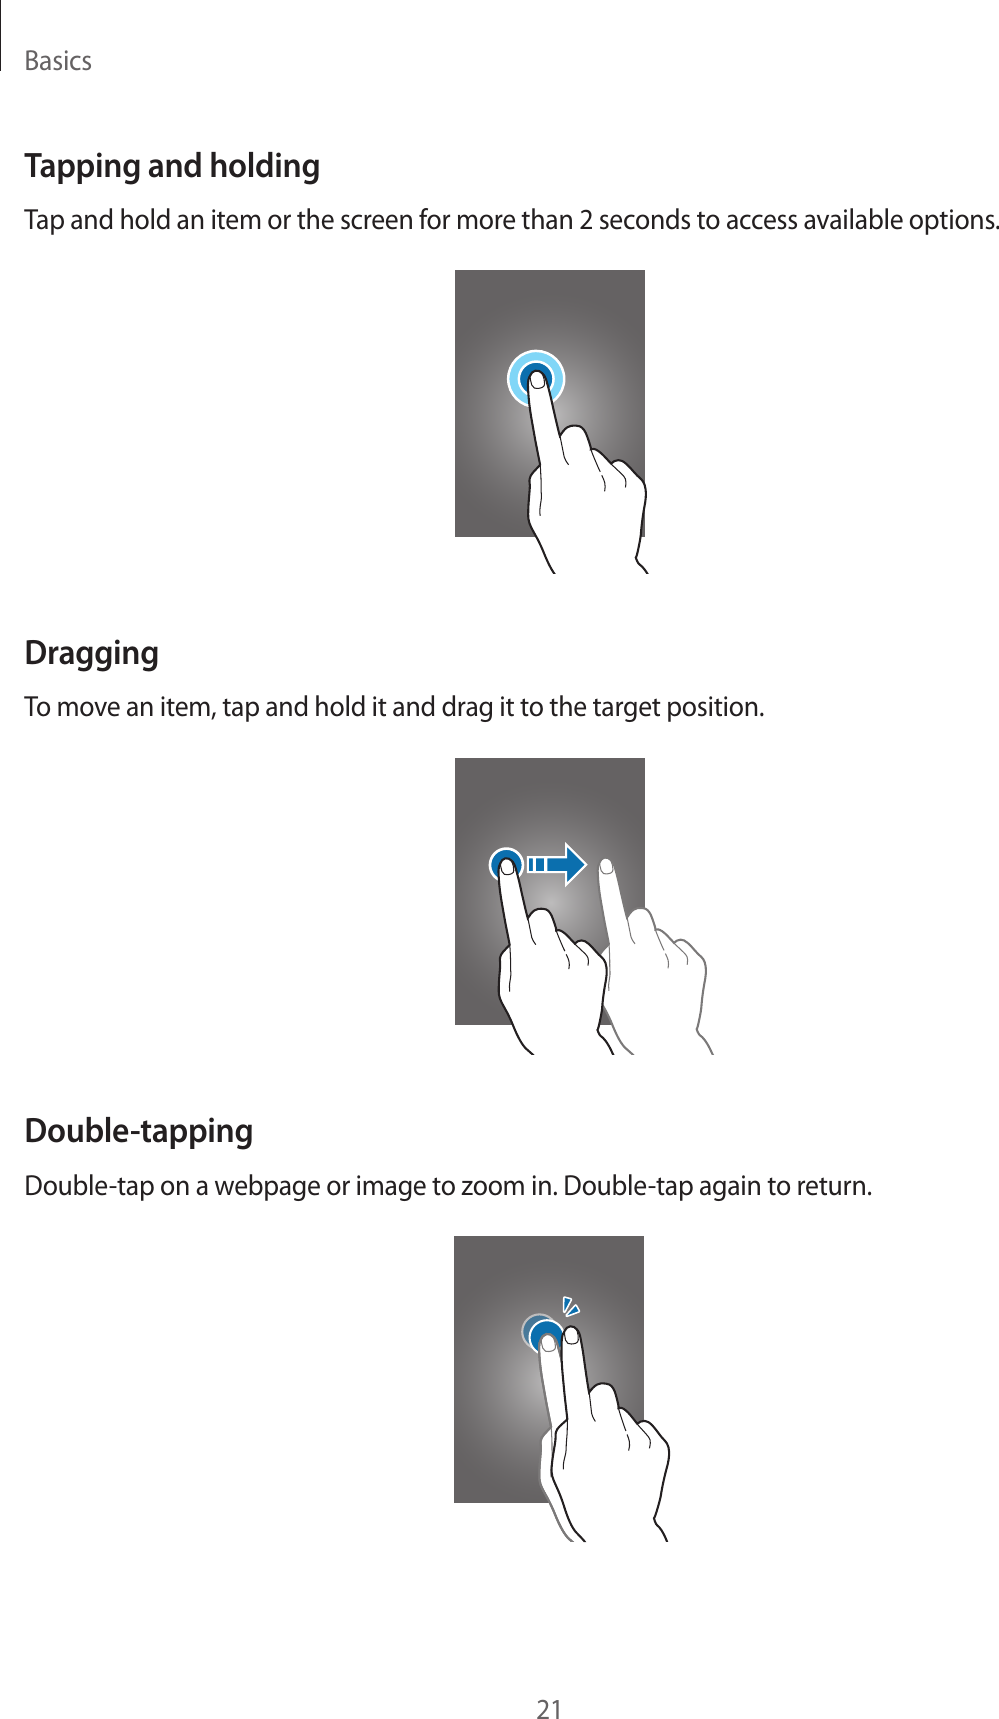 Basics21Tapping and holdingTap and hold an item or the screen for more than 2 seconds to access available options.DraggingTo move an item, tap and hold it and drag it to the target position.Double-tappingDouble-tap on a webpage or image to zoom in. Double-tap again to return.